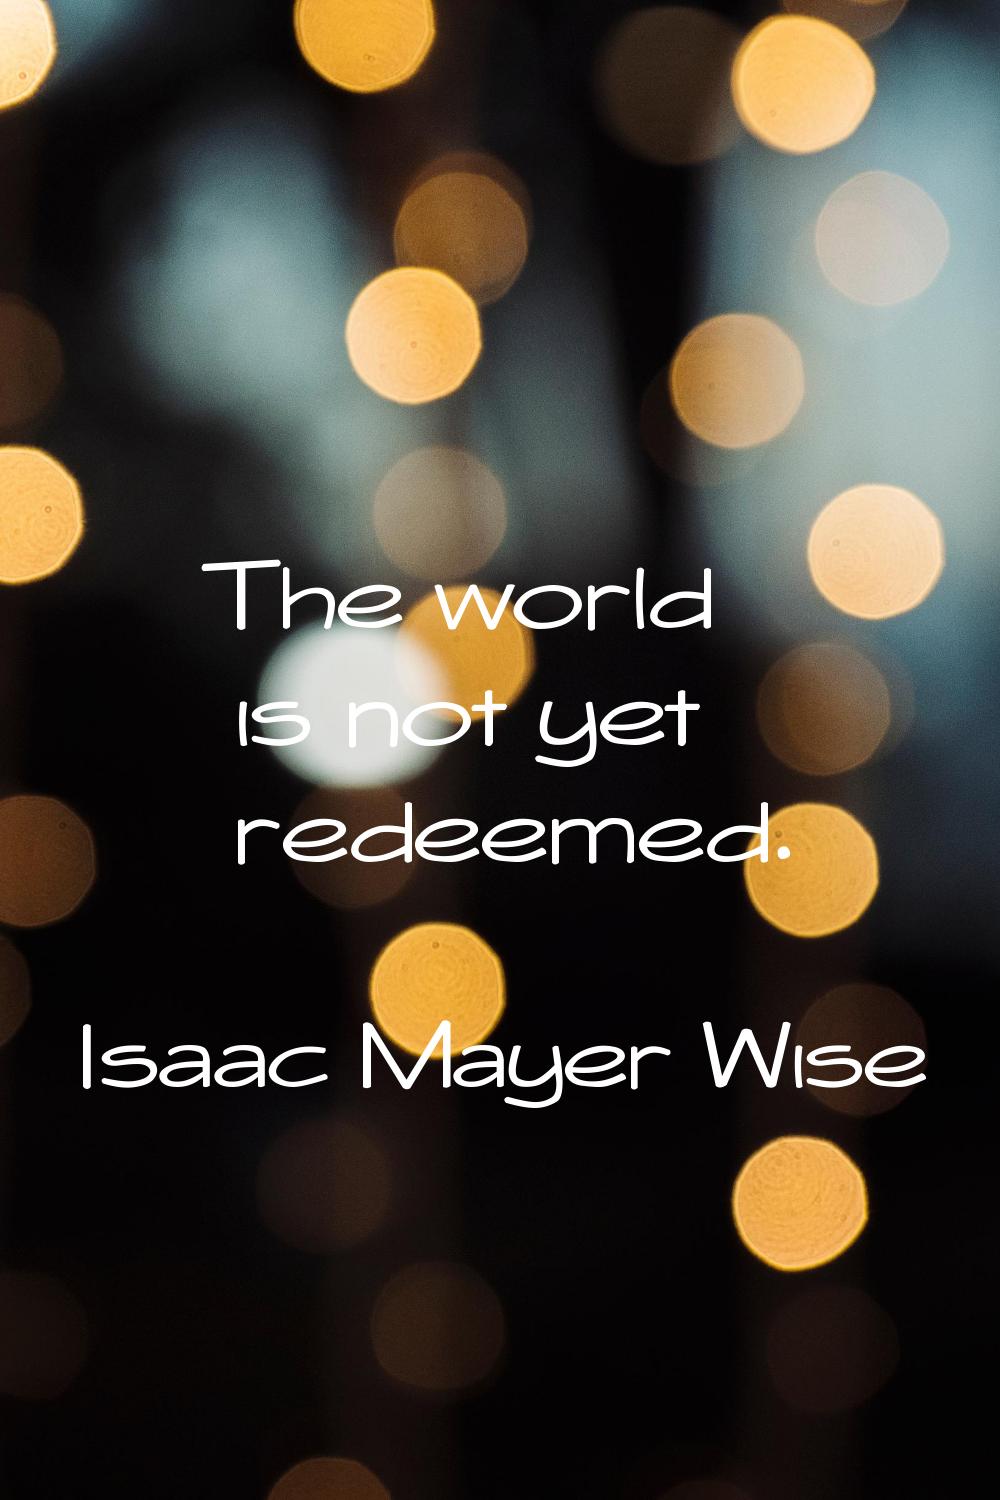 The world is not yet redeemed.